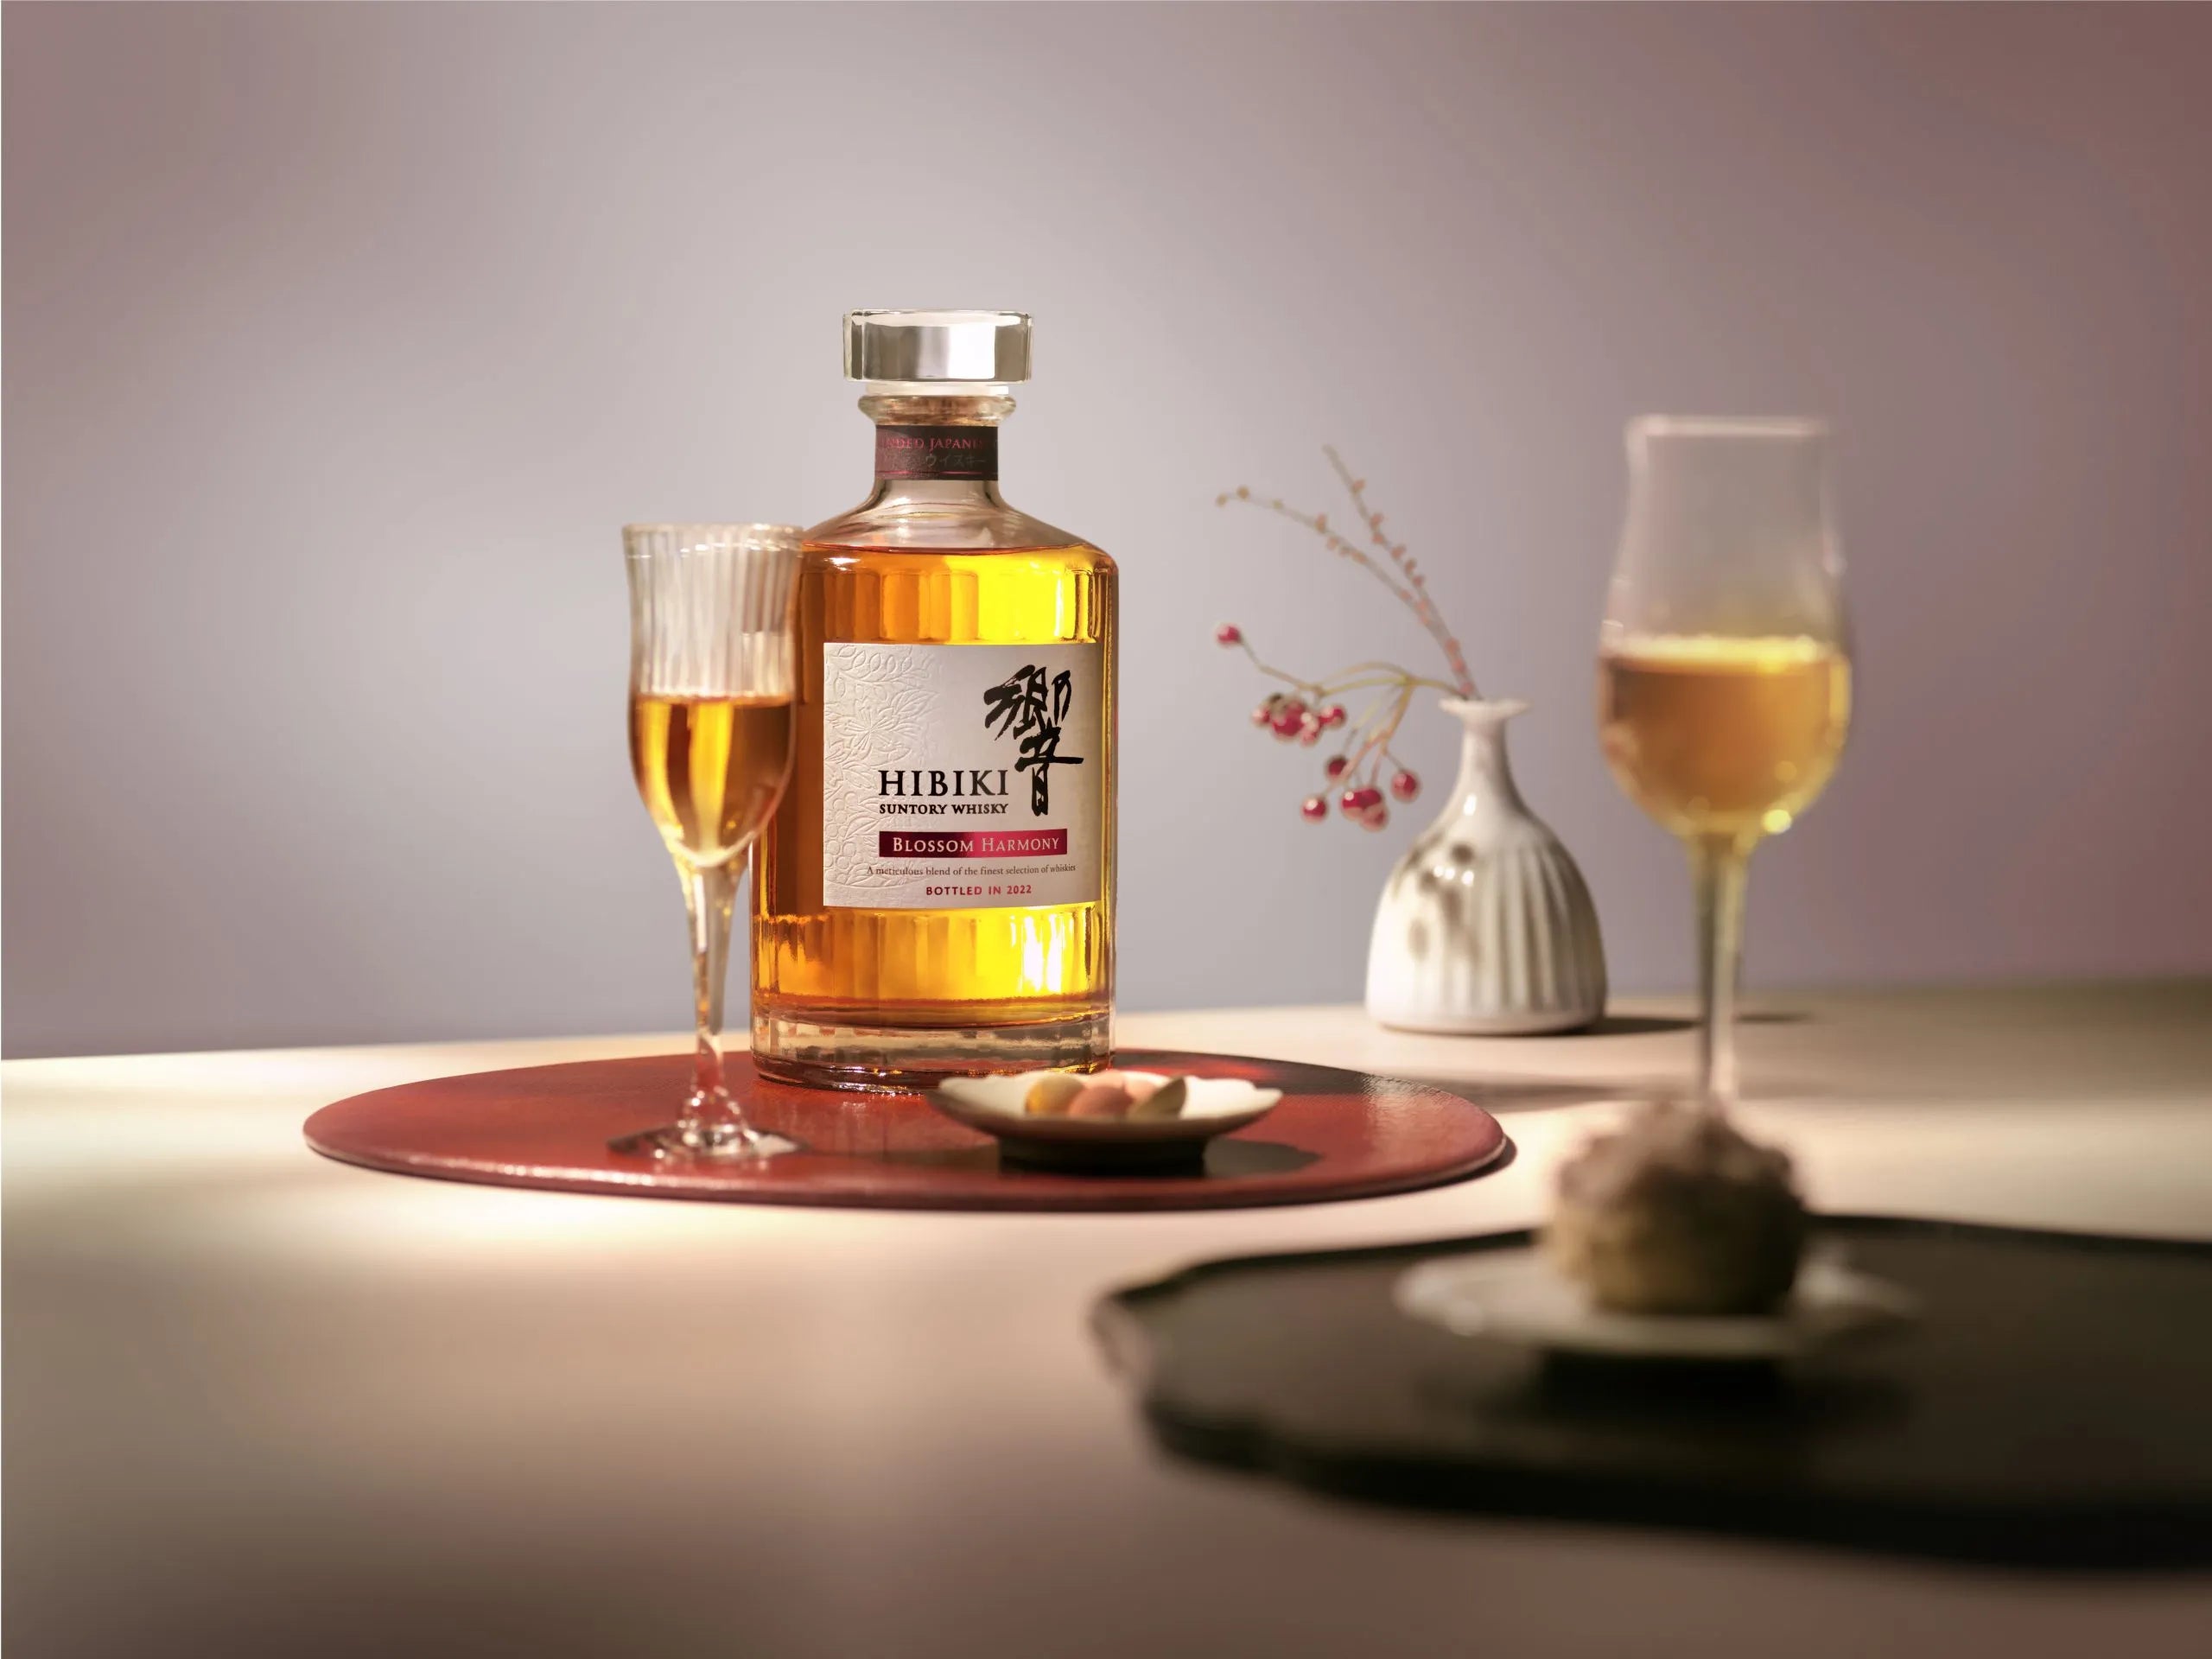 Hibiki Blossom Harmony 2022 Limited Edition | Delivery & Gifting